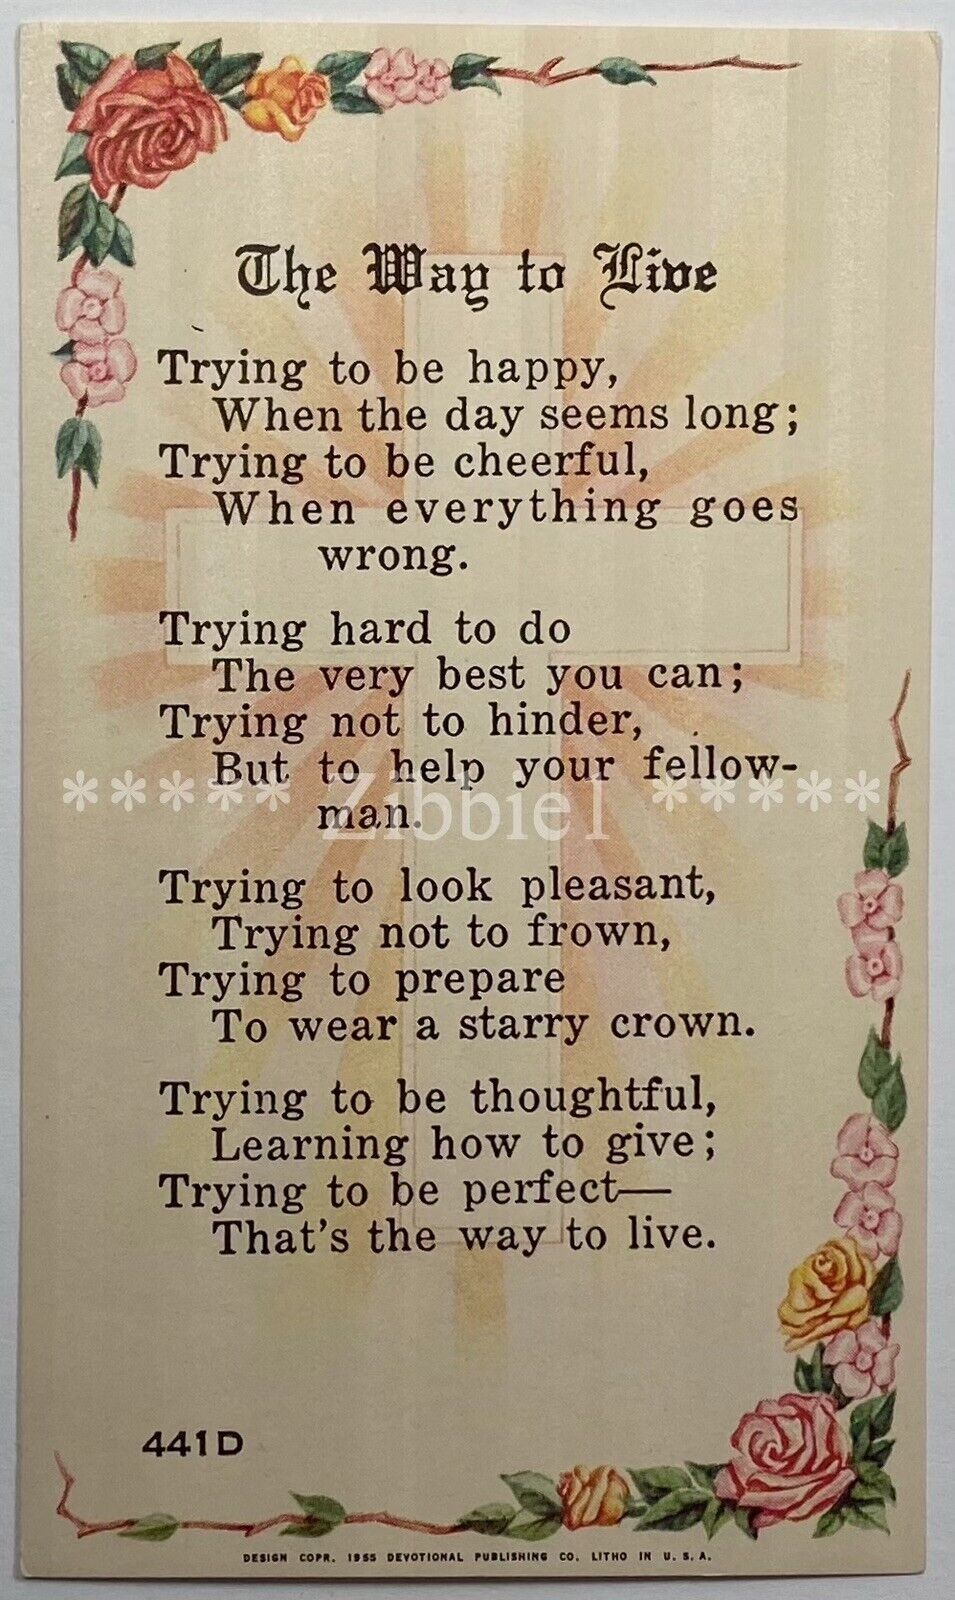 The Way to Live, Vintage 1955 Holy Devotional Prayer Card.